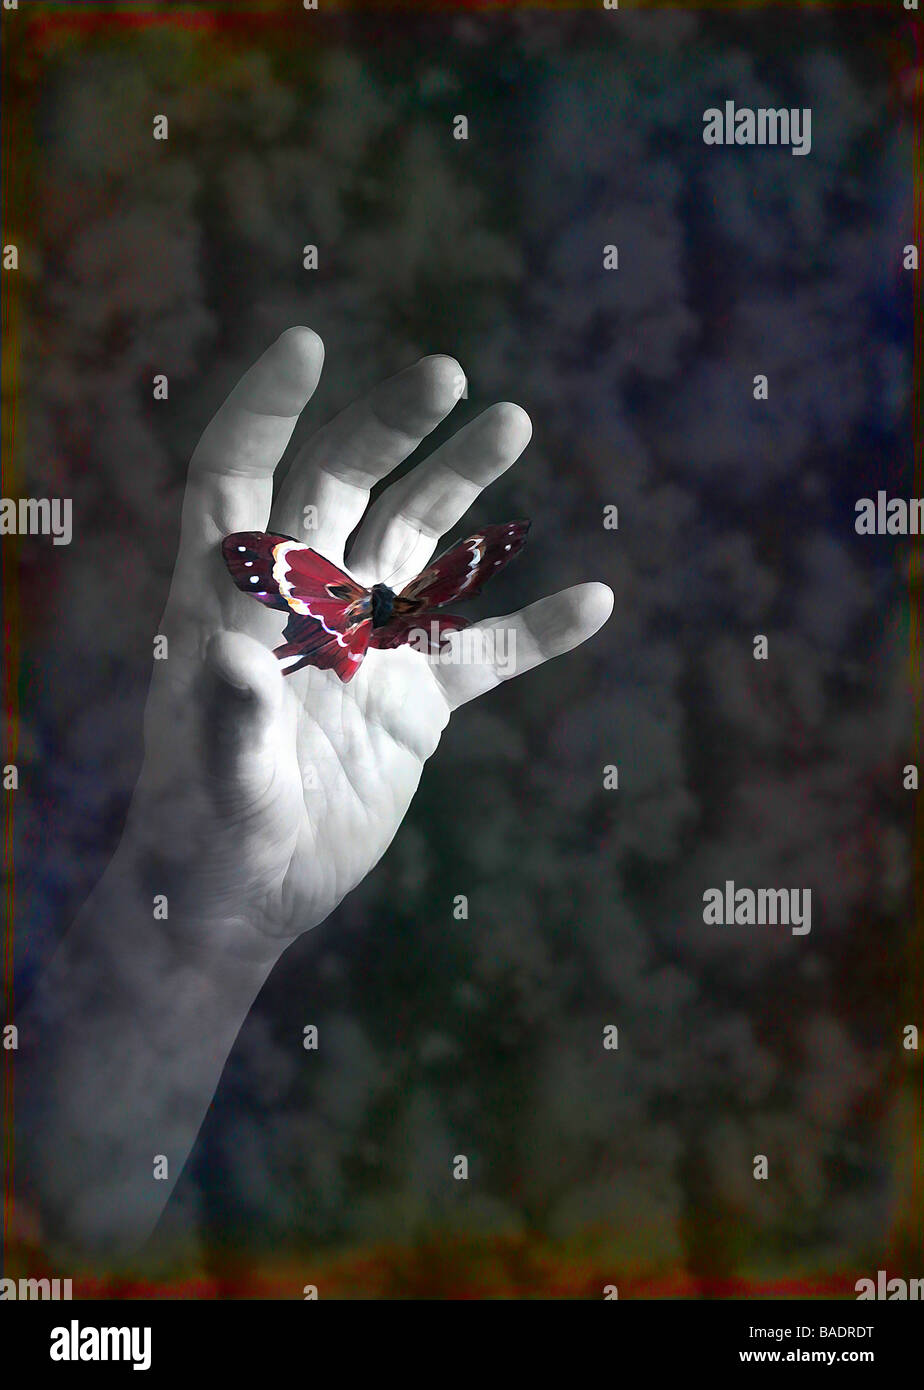 Concept image. Hand catching a butterfly.  Digital art. Stock Photo